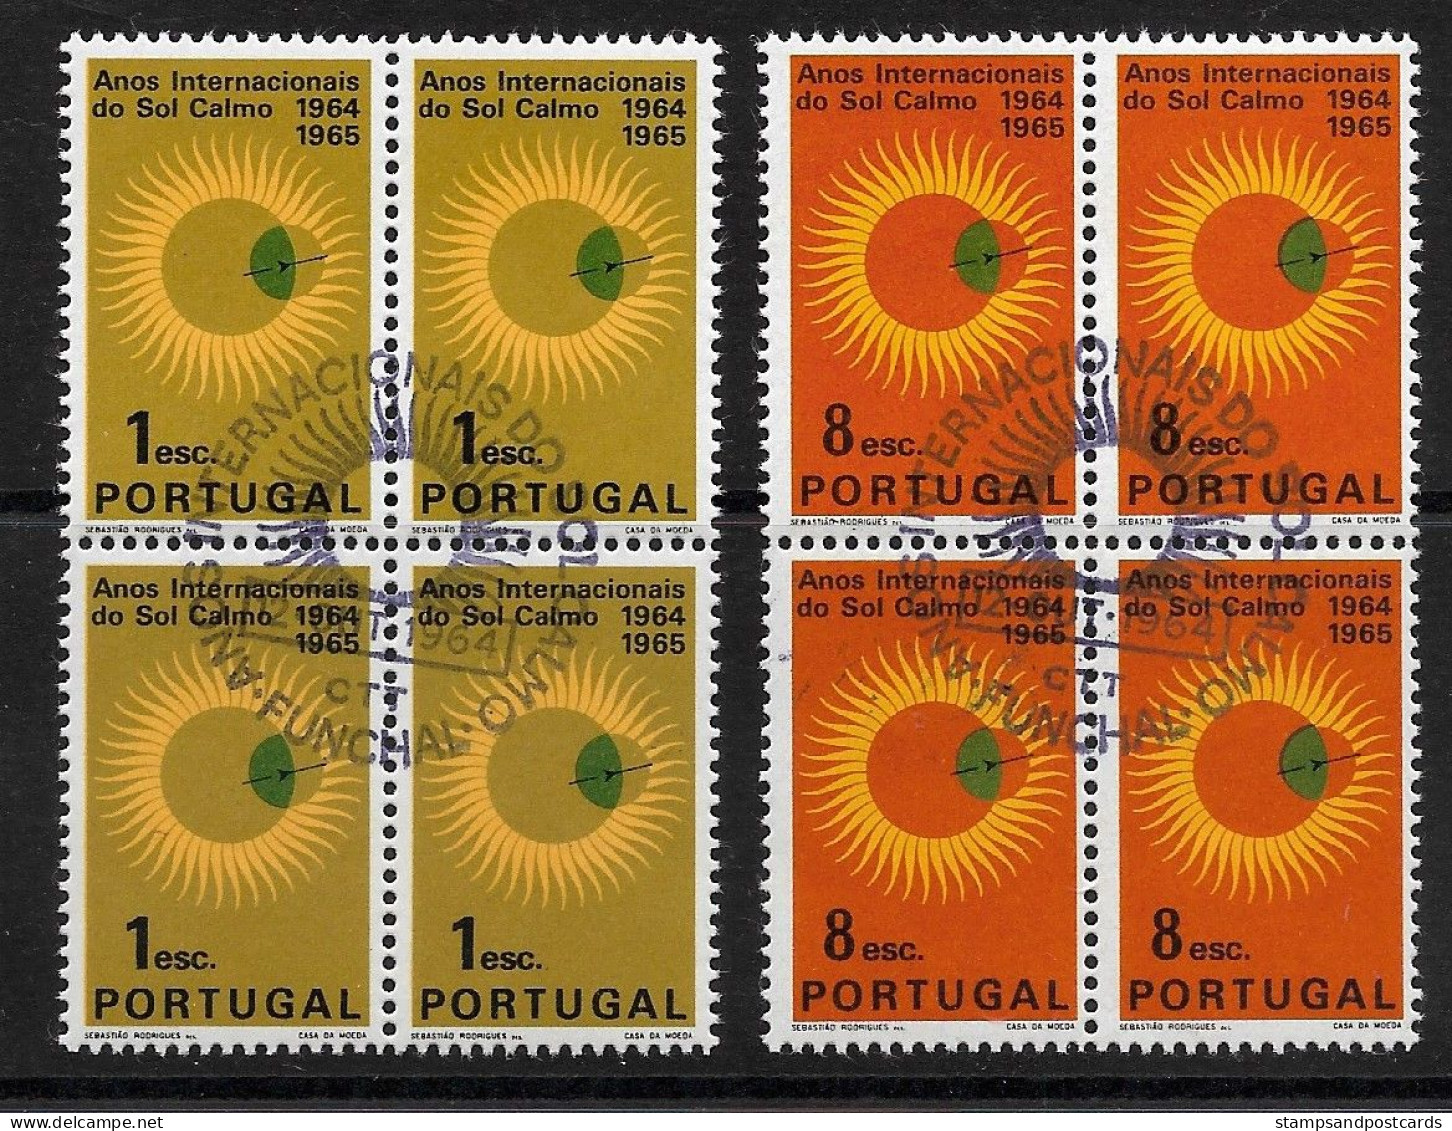 Portugal 1964 Années Internationales Soleil Calme X 4 Cachet Premier Jour Funchal Madeira Madère Quiet Sun Int. Year - Used Stamps